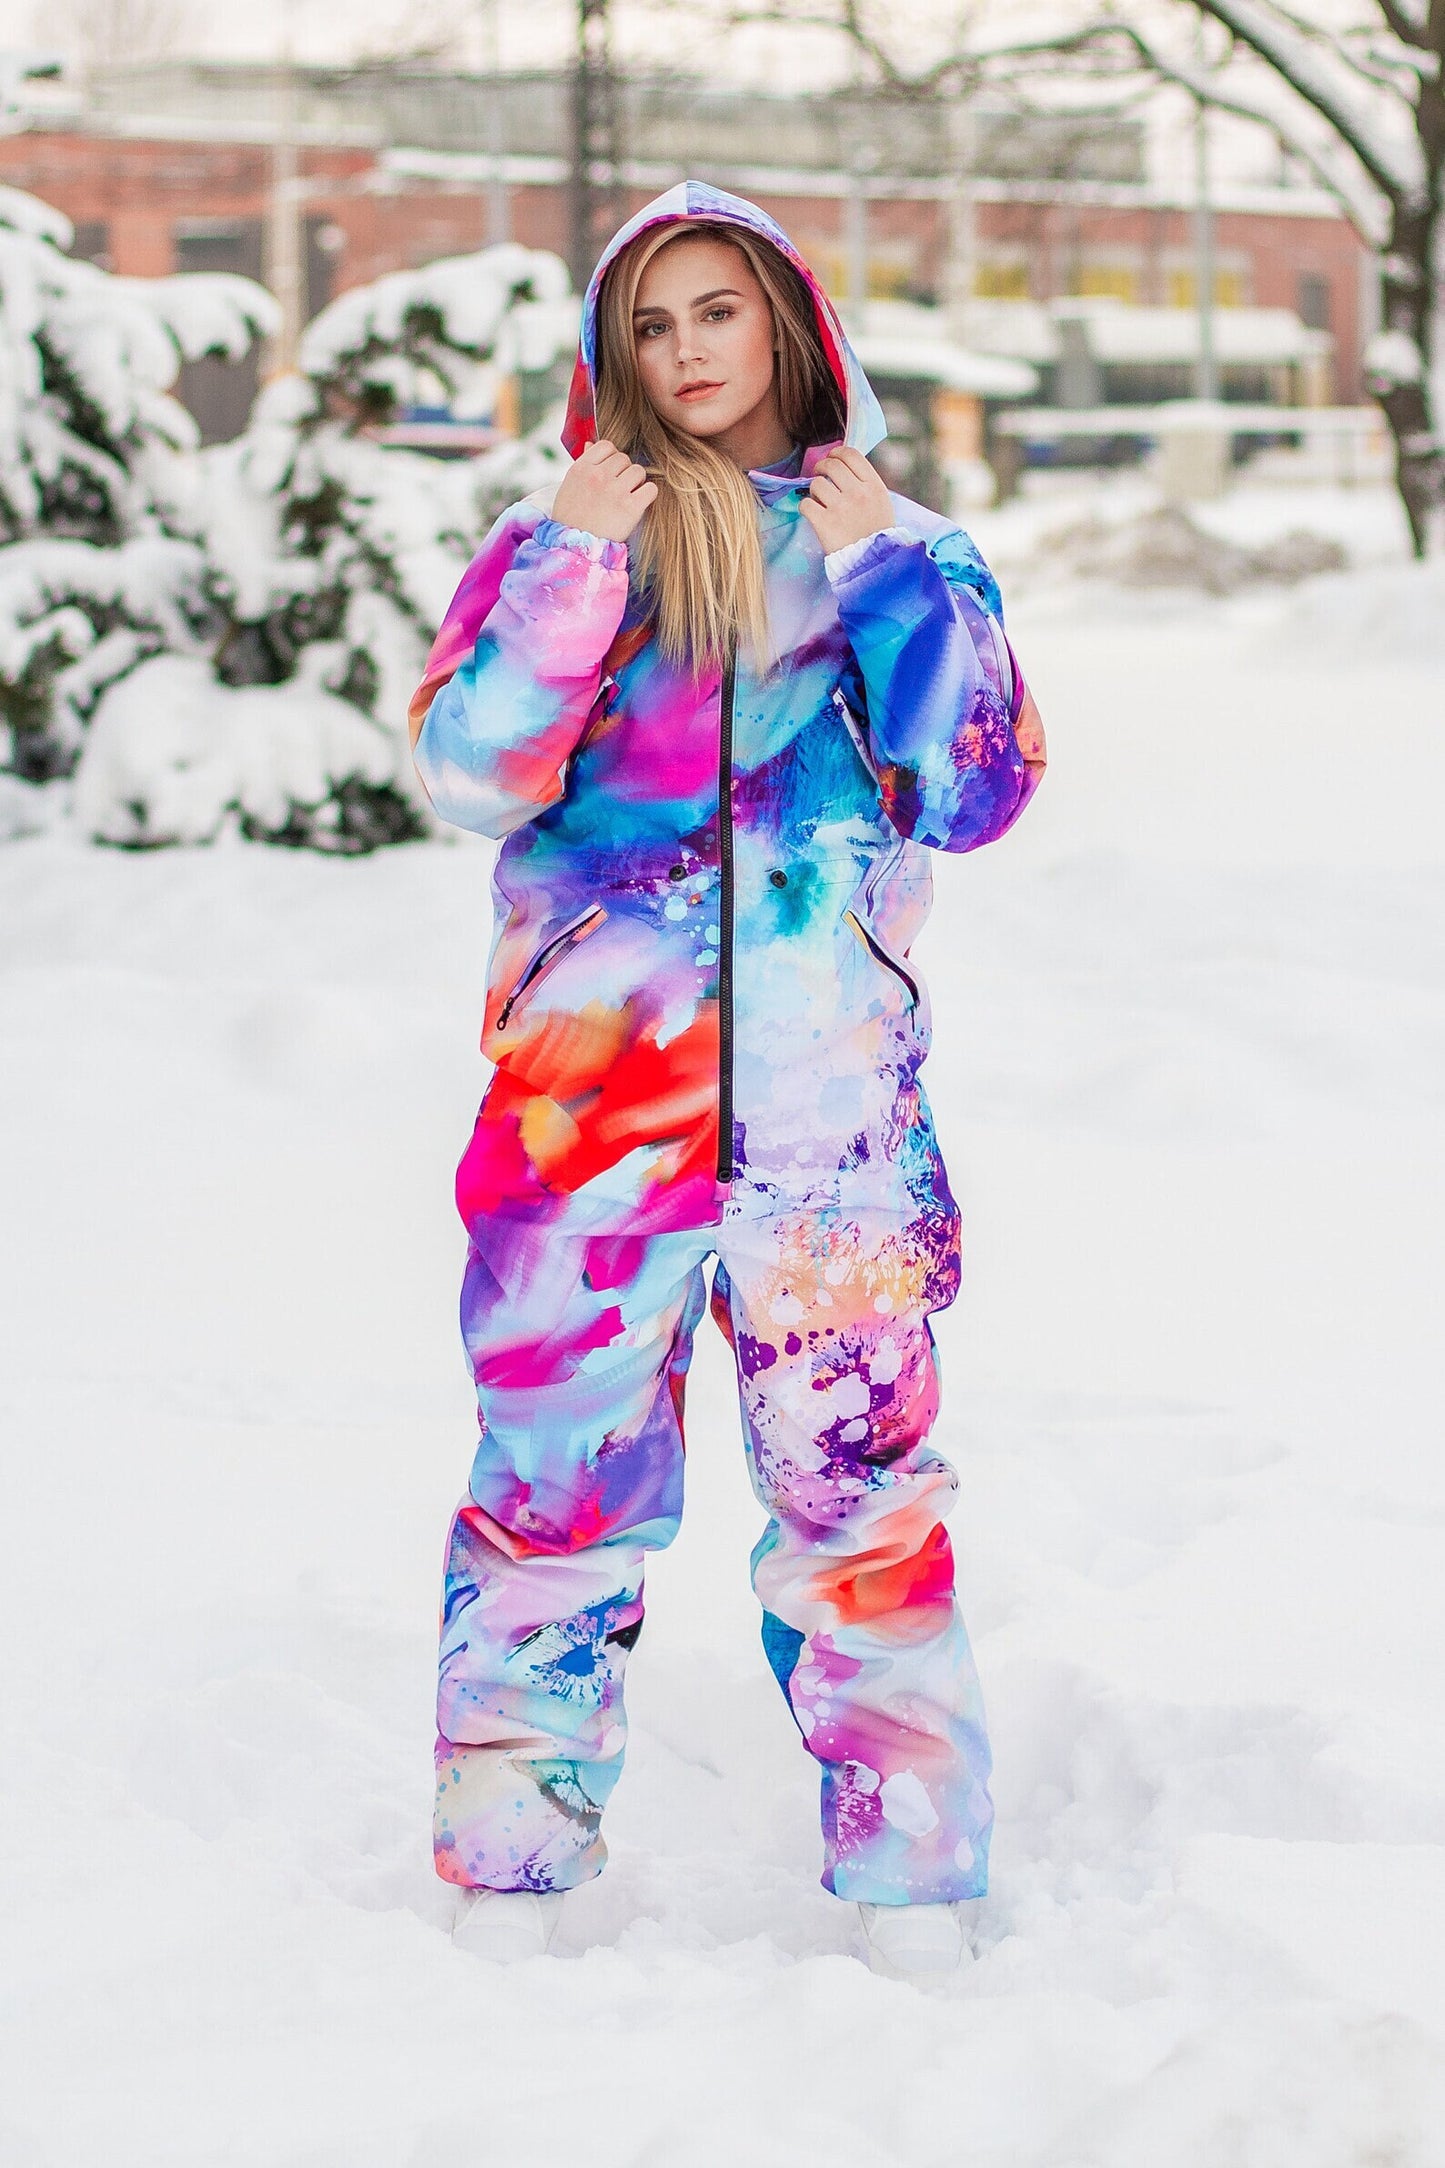 SET: Pink Winter Ski Jumpsuit, Snowboard Clothes, Snowboard suit, Skiing Overall, Women Mountain's clothes, Winter Thermal underwear